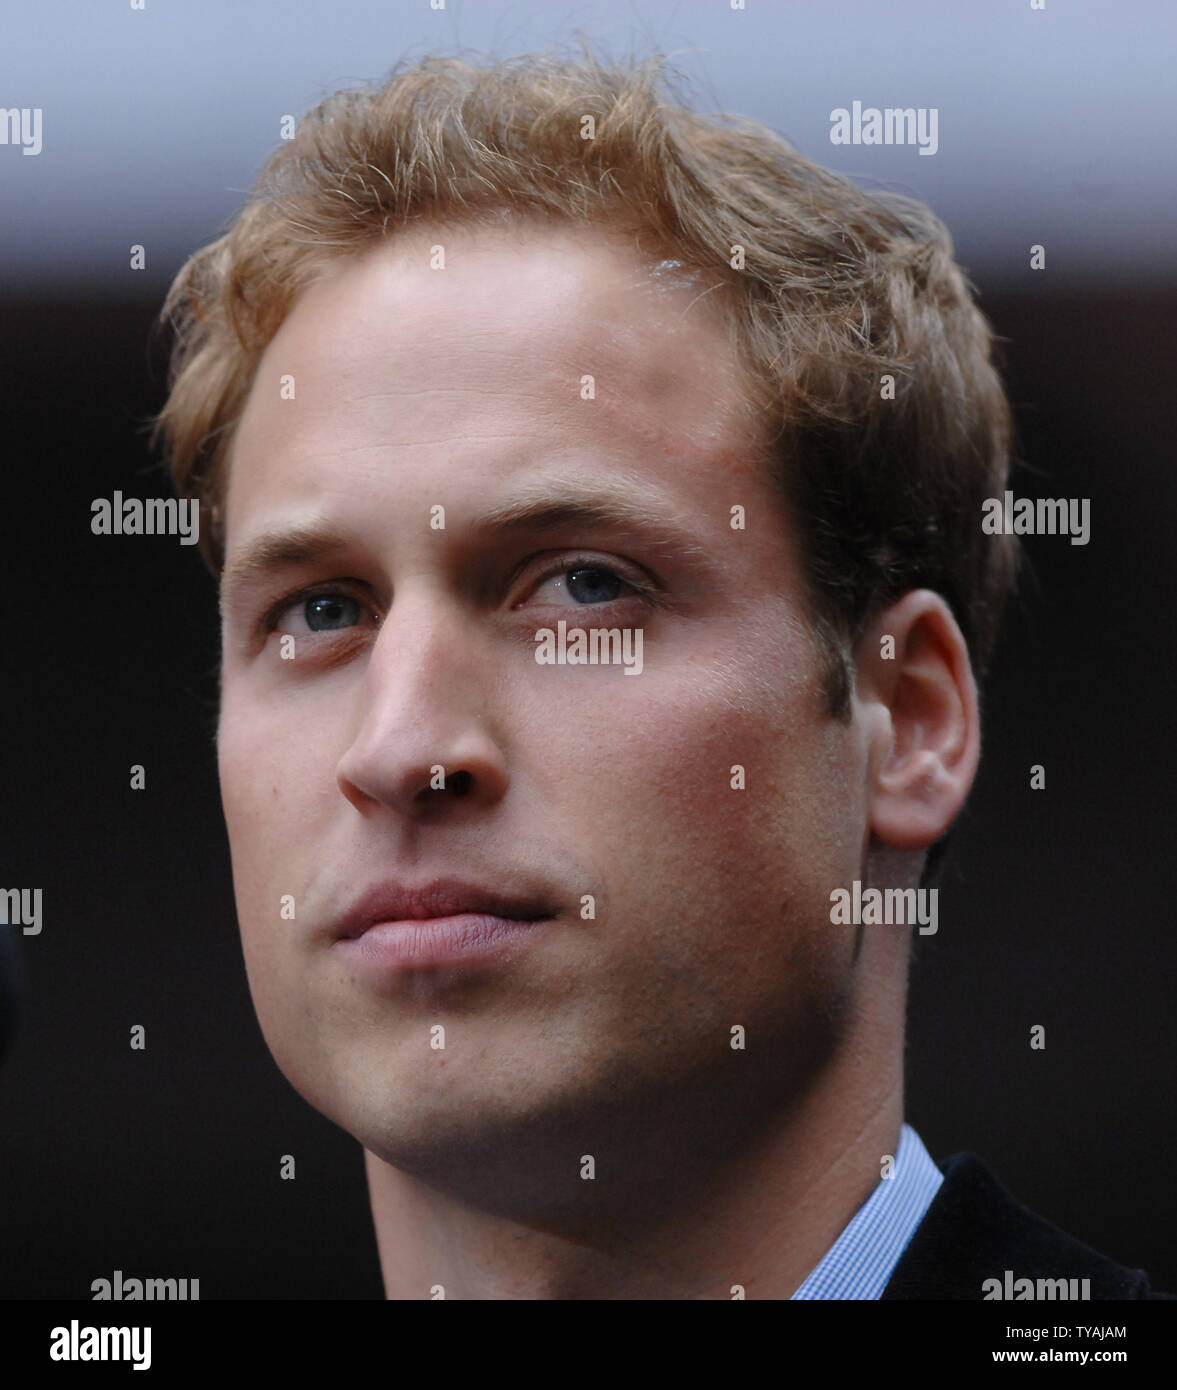 Prince William attends 'The Concert For Diana' at Wembley Stadium in London on July 1, 2007.  (UPI Photo/Rune Hellestad) Stock Photo